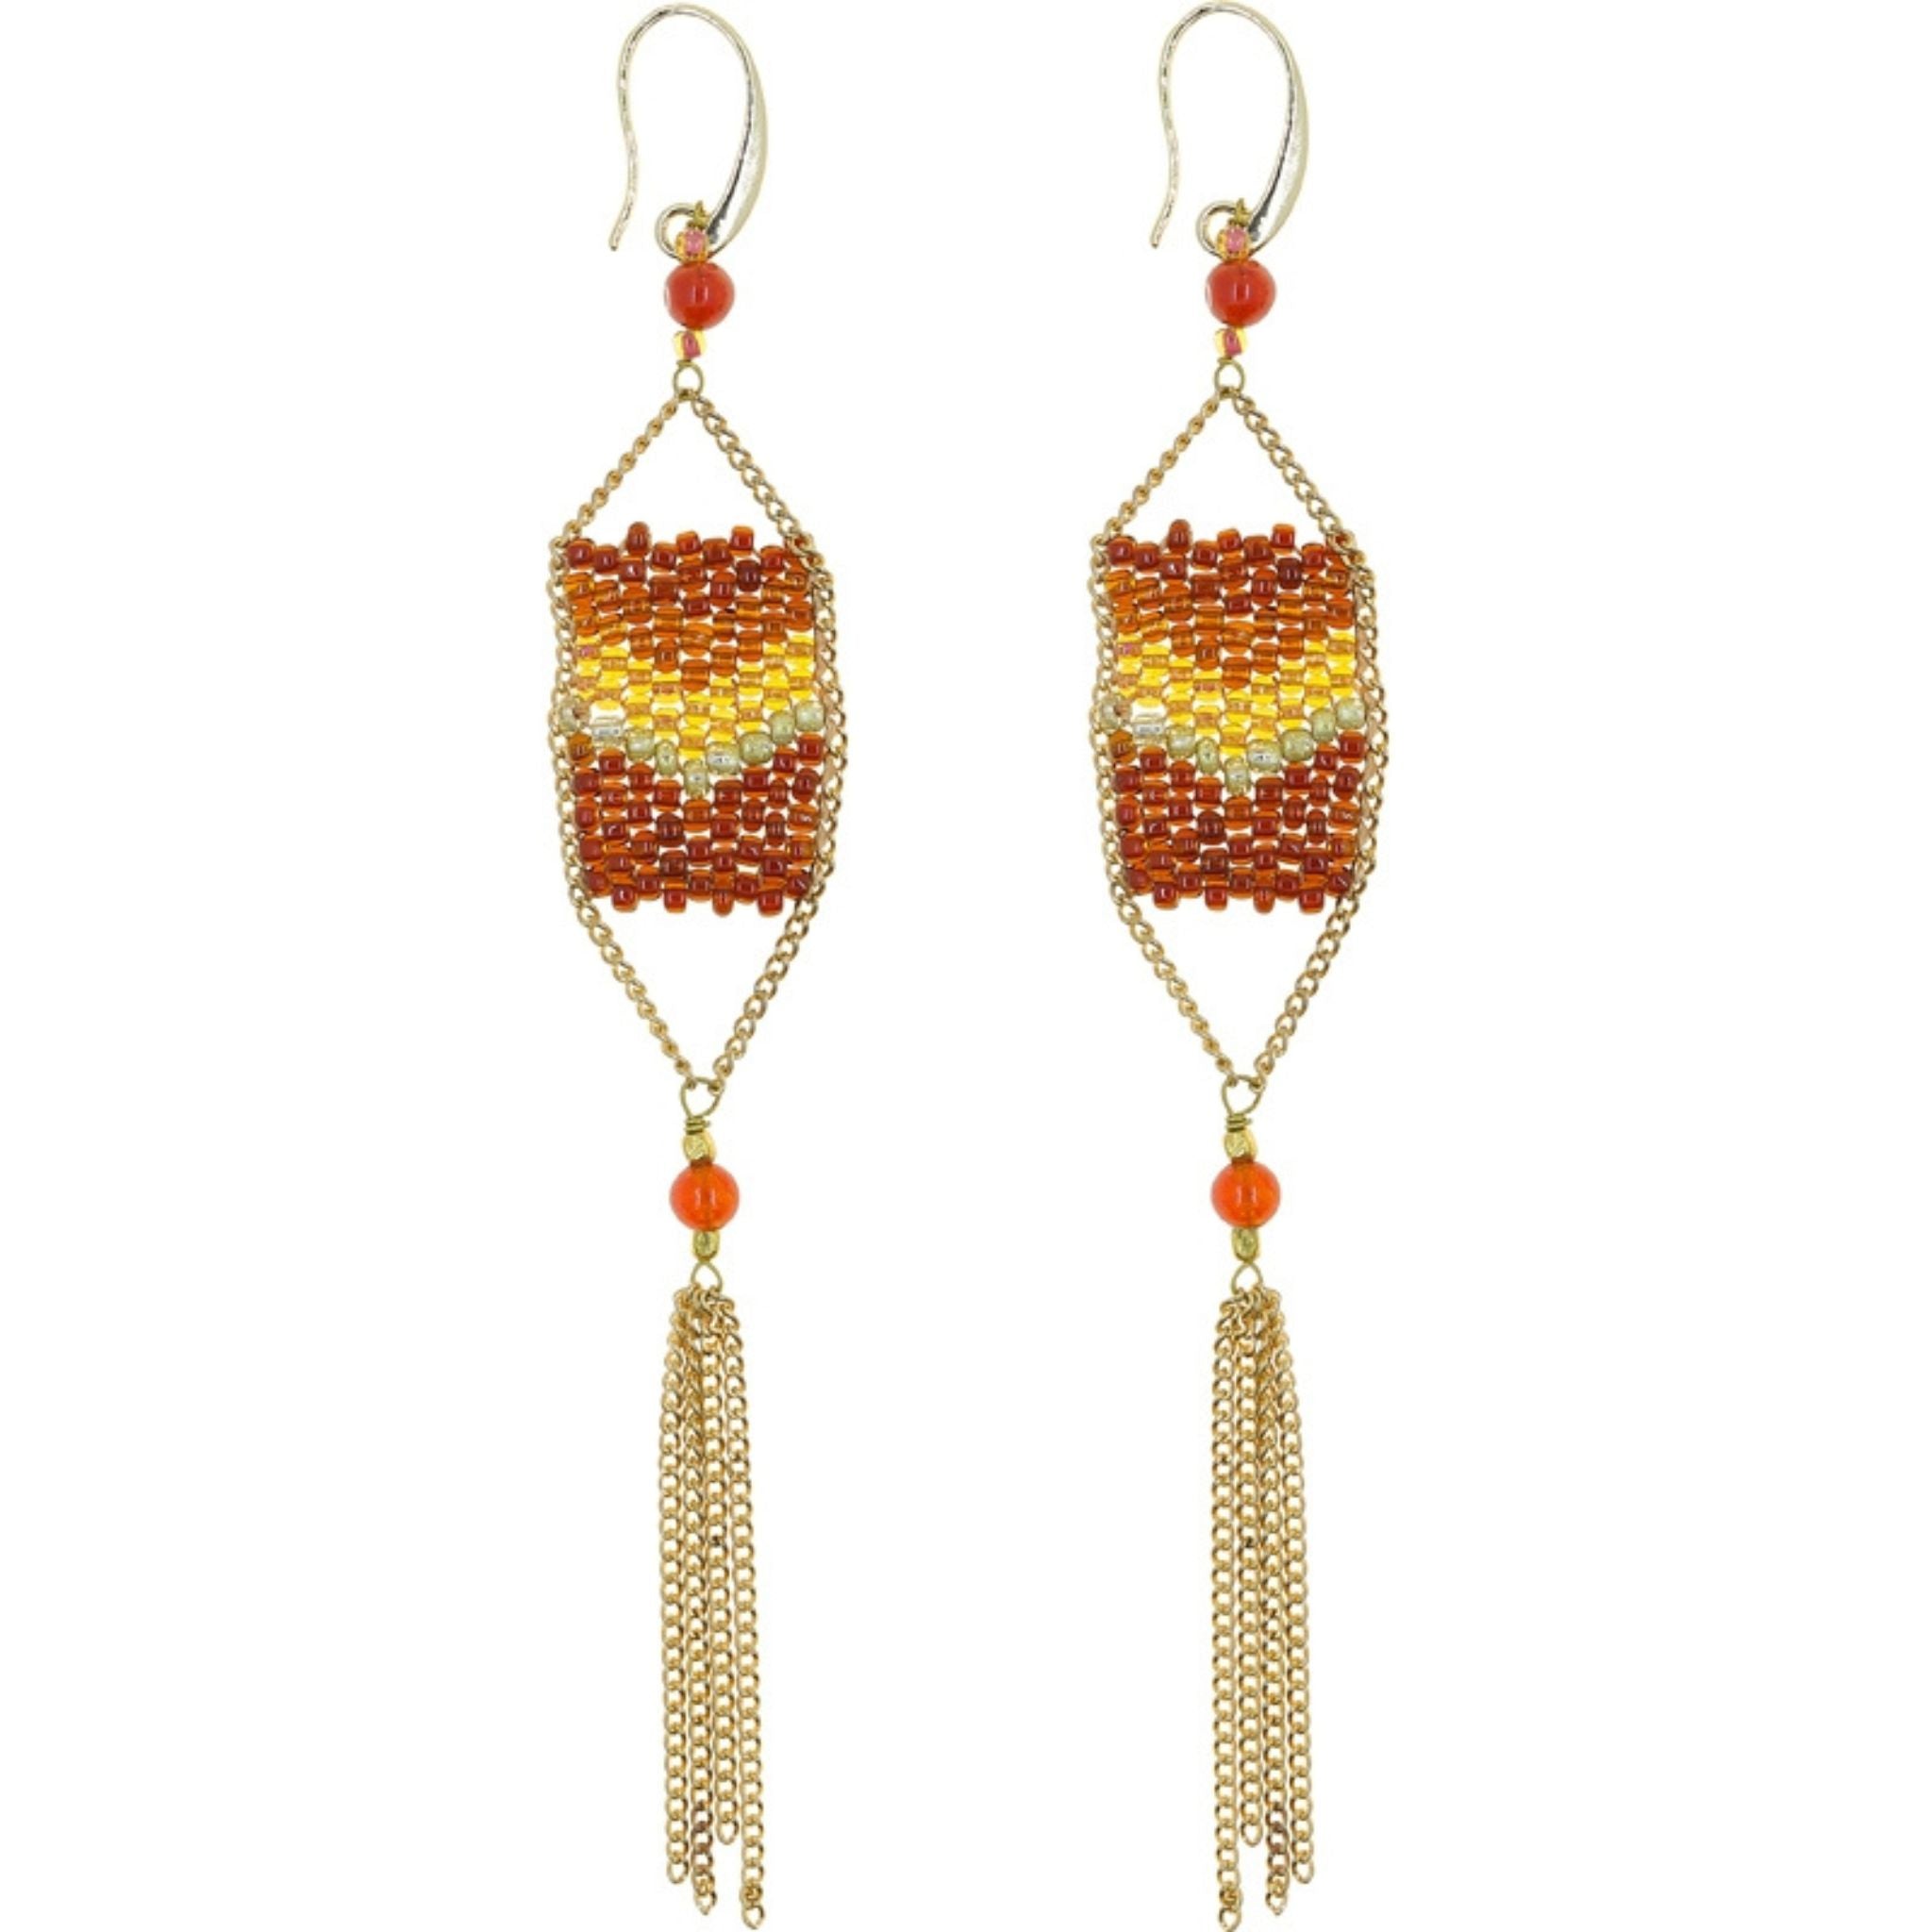 Beaded Earrings from Thailand